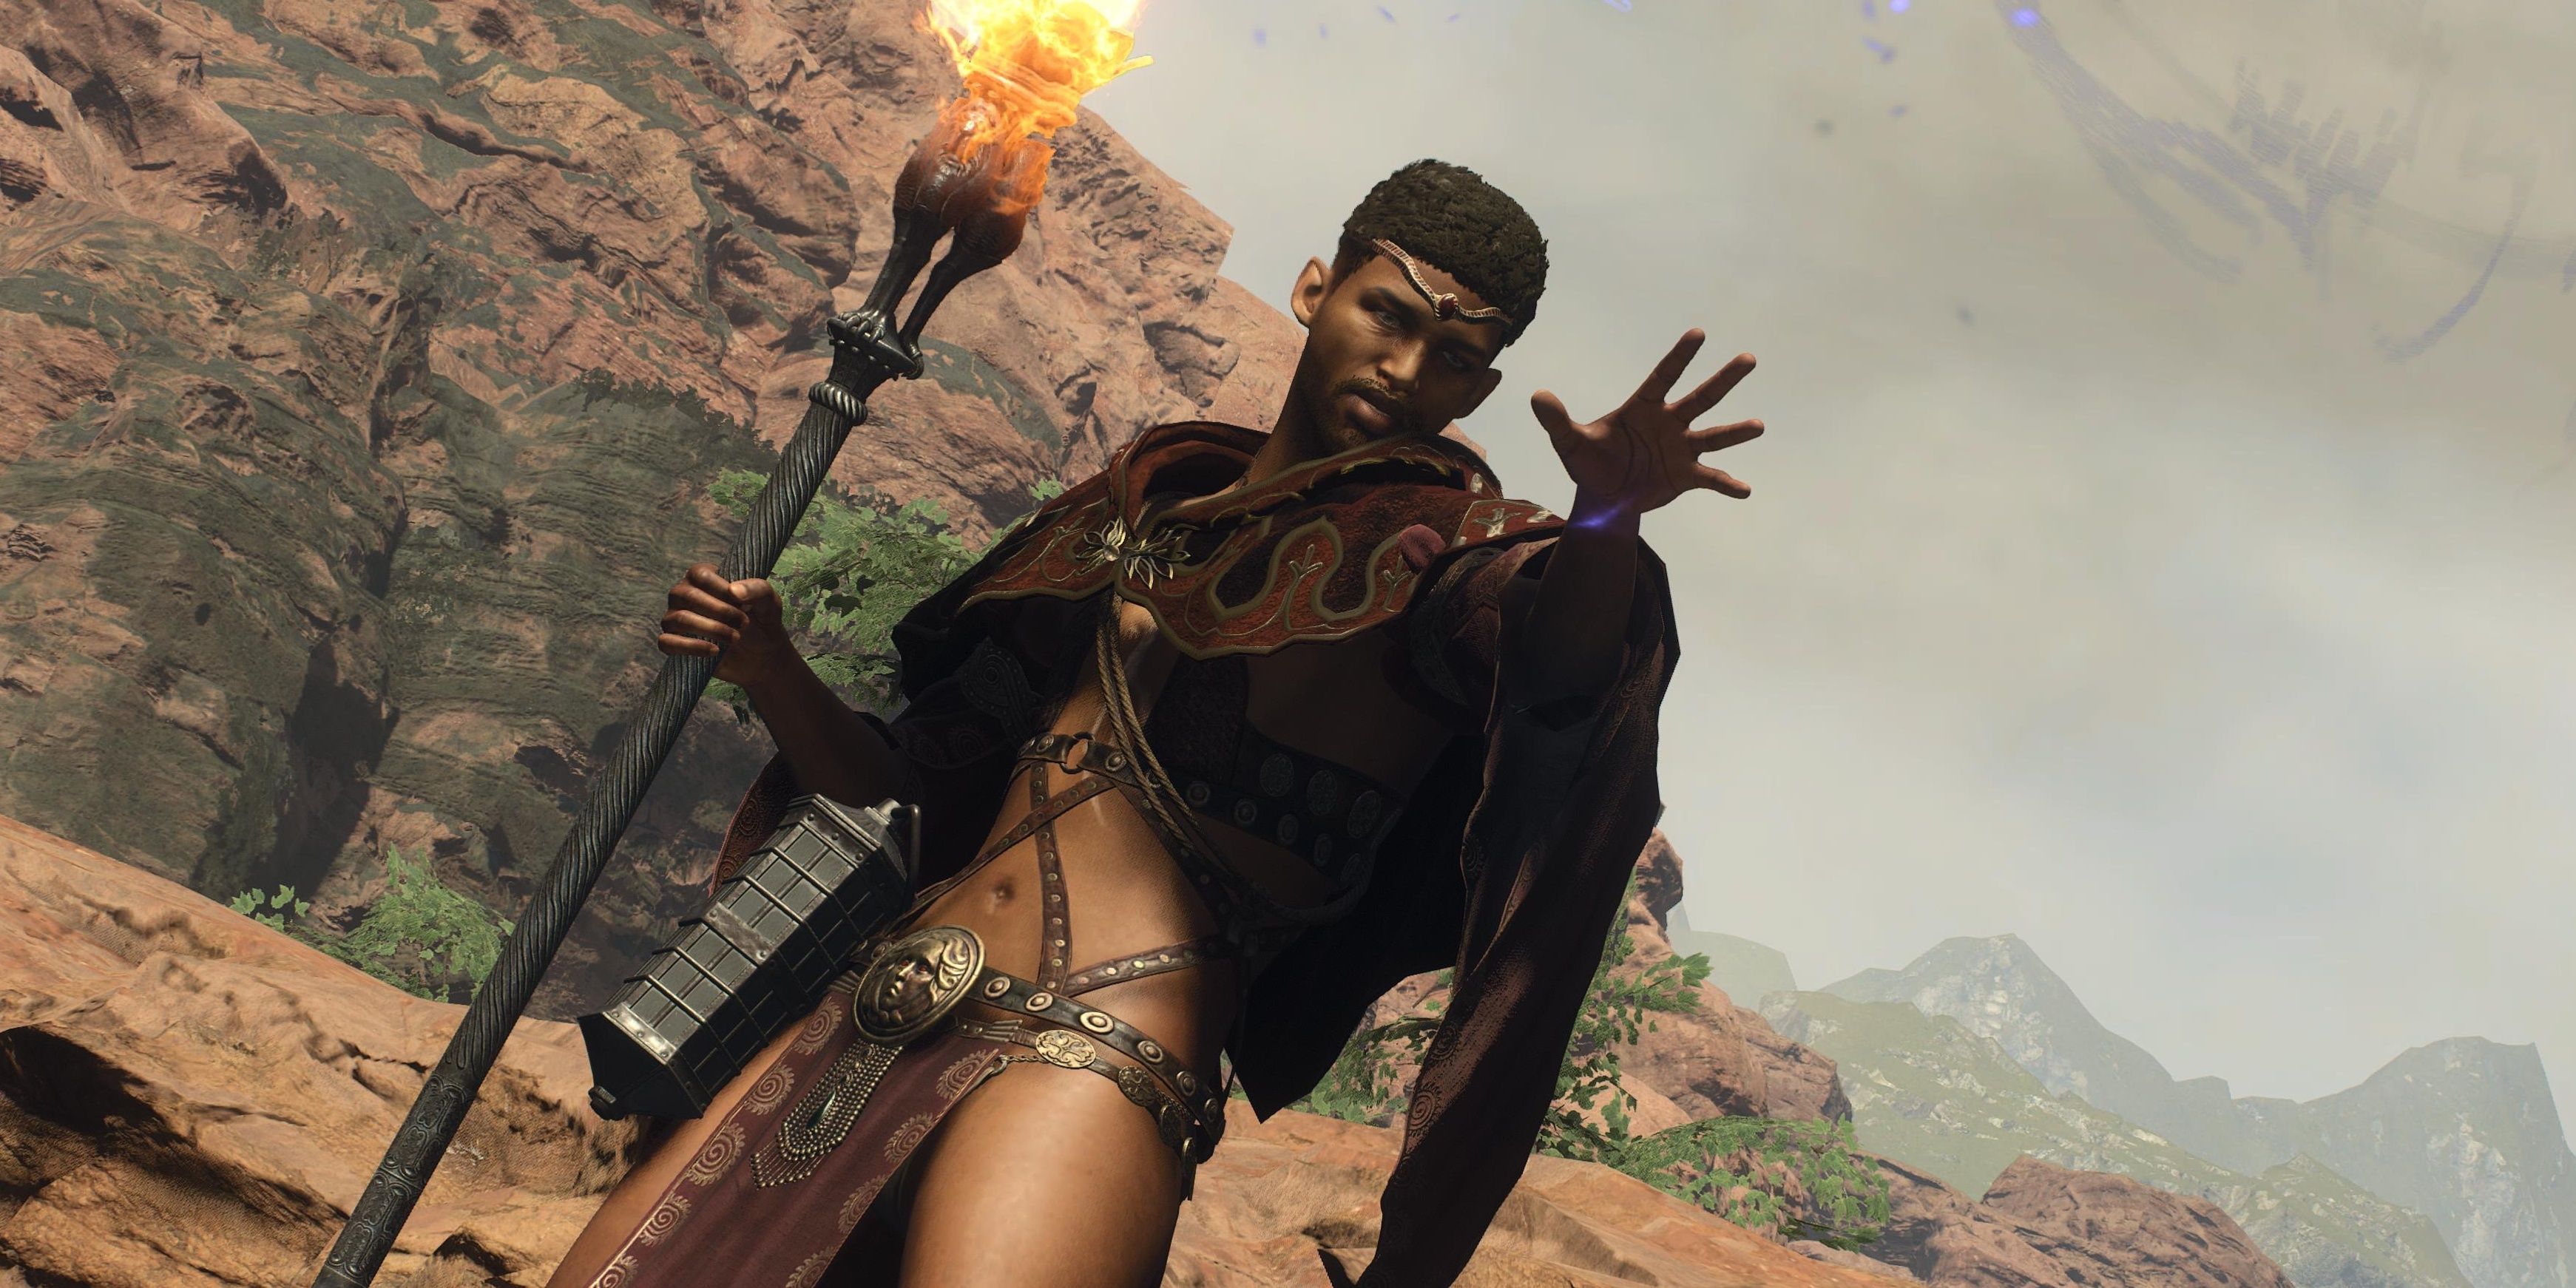 Arisen casts a spell in Dragon's Dogma 2